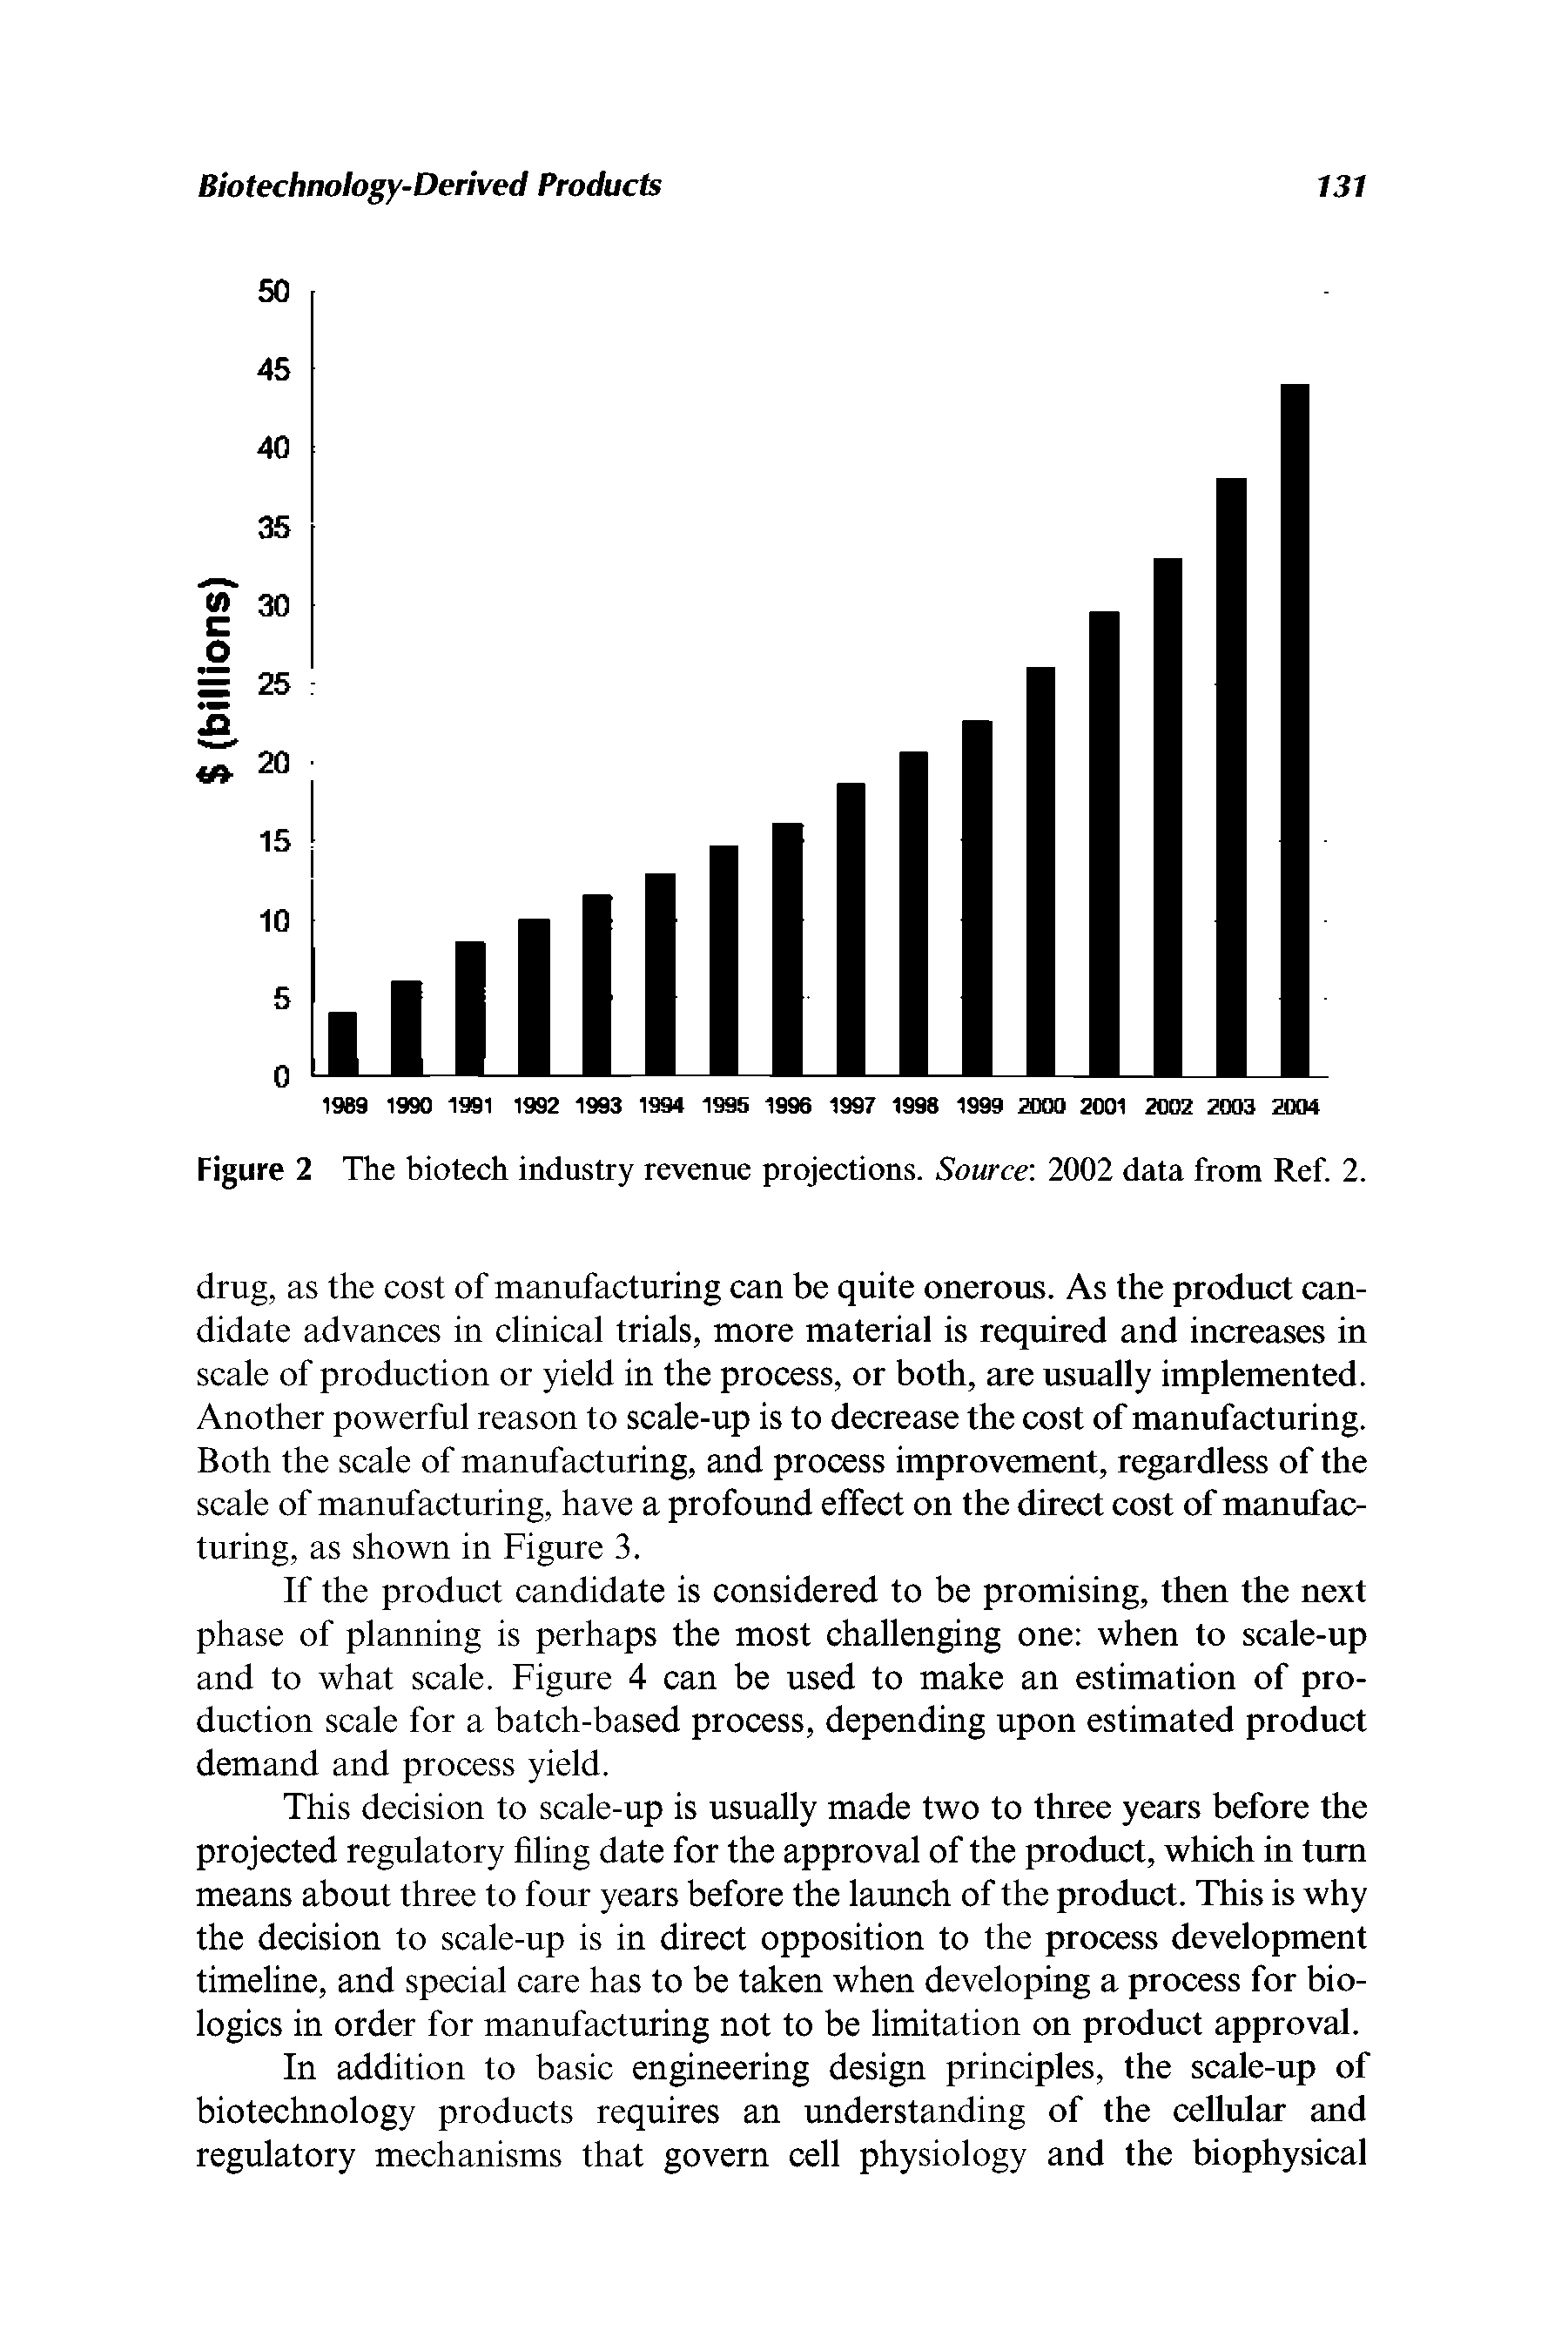 Figure 2 The biotech industry revenue projections. Source 2002 data from Ref. 2.